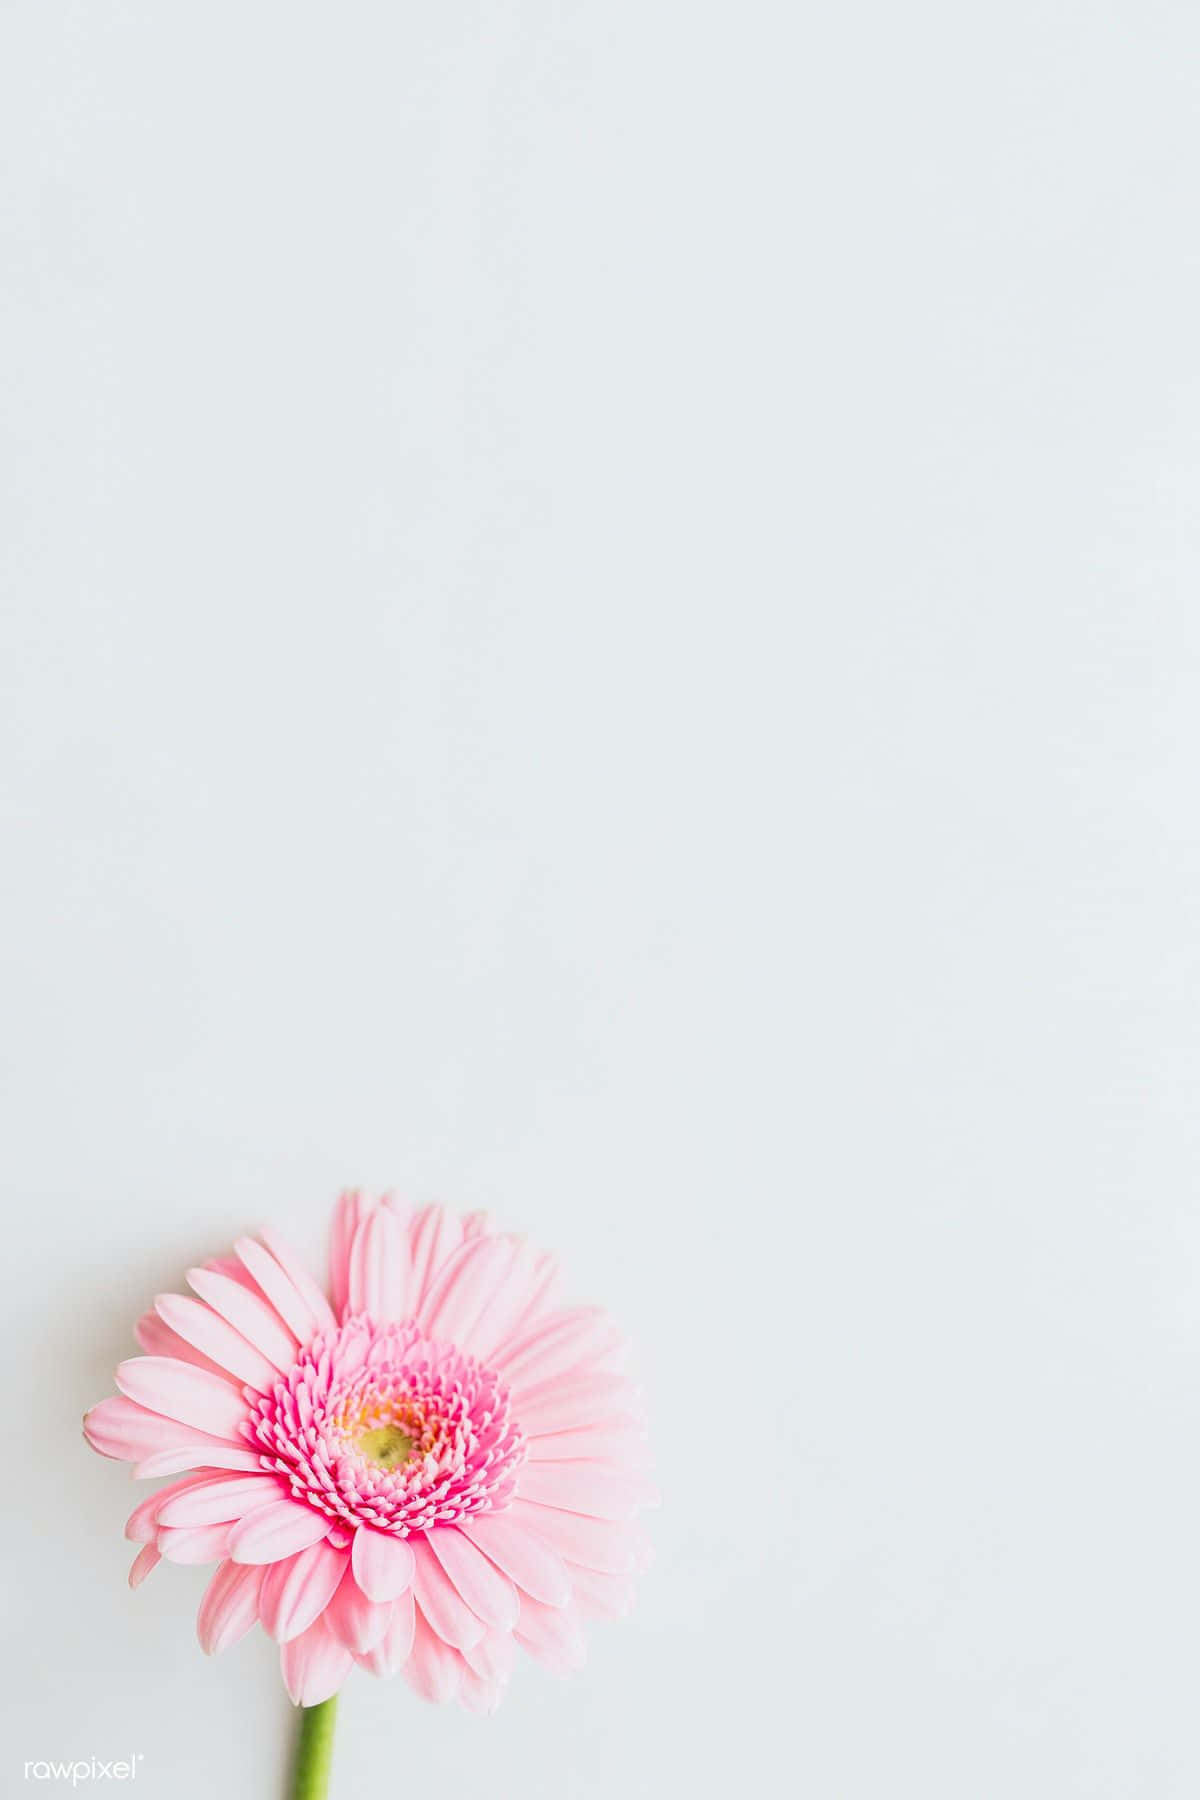 One Pink Spring Daisy iPhone Wallpaper